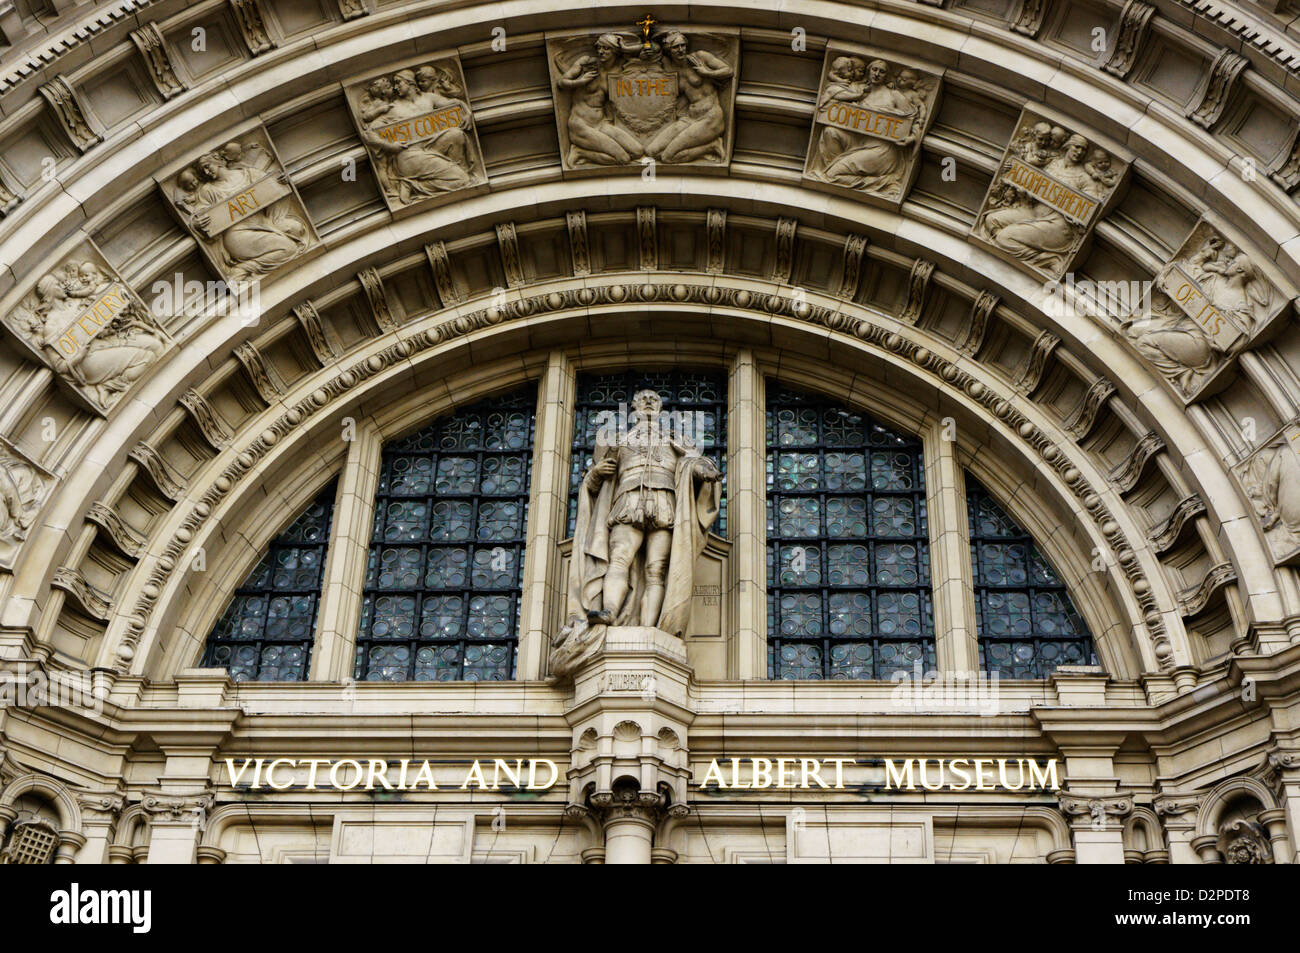 The carved archway over the main entrance to the Victoria and Albert Museum in London. Stock Photo